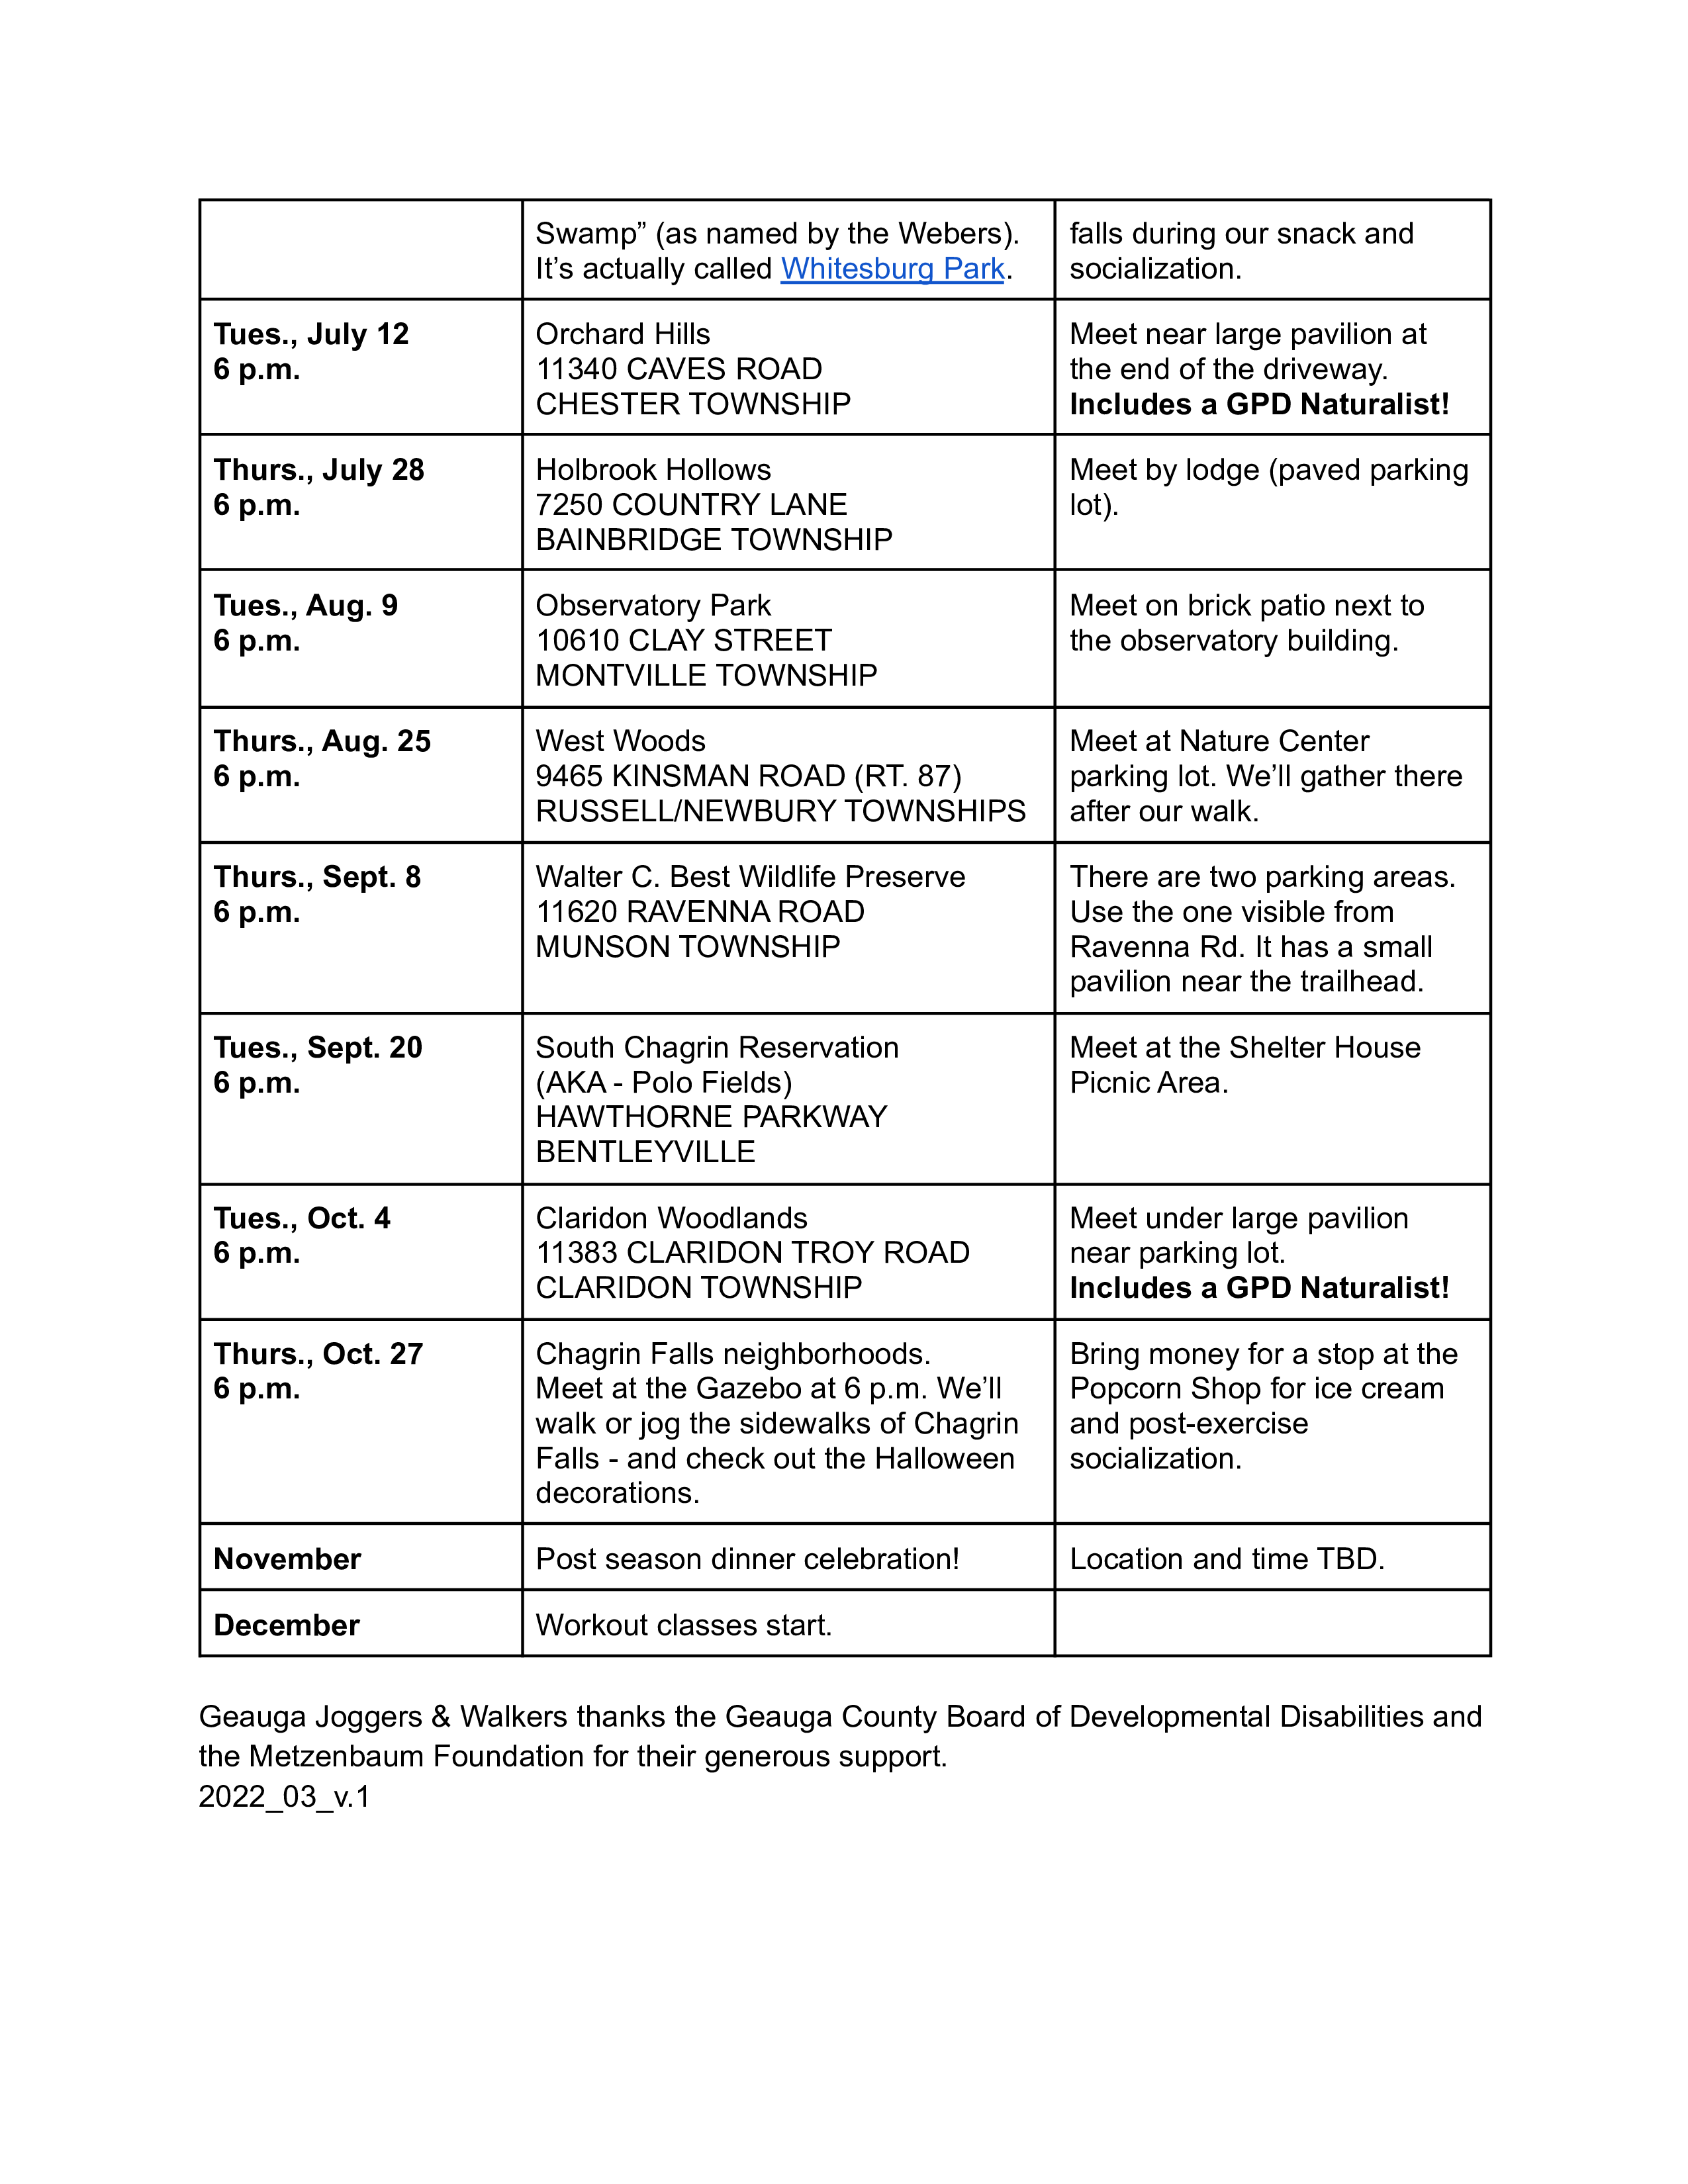 2022 Geauga Joggers and Walkers Schedule-P2